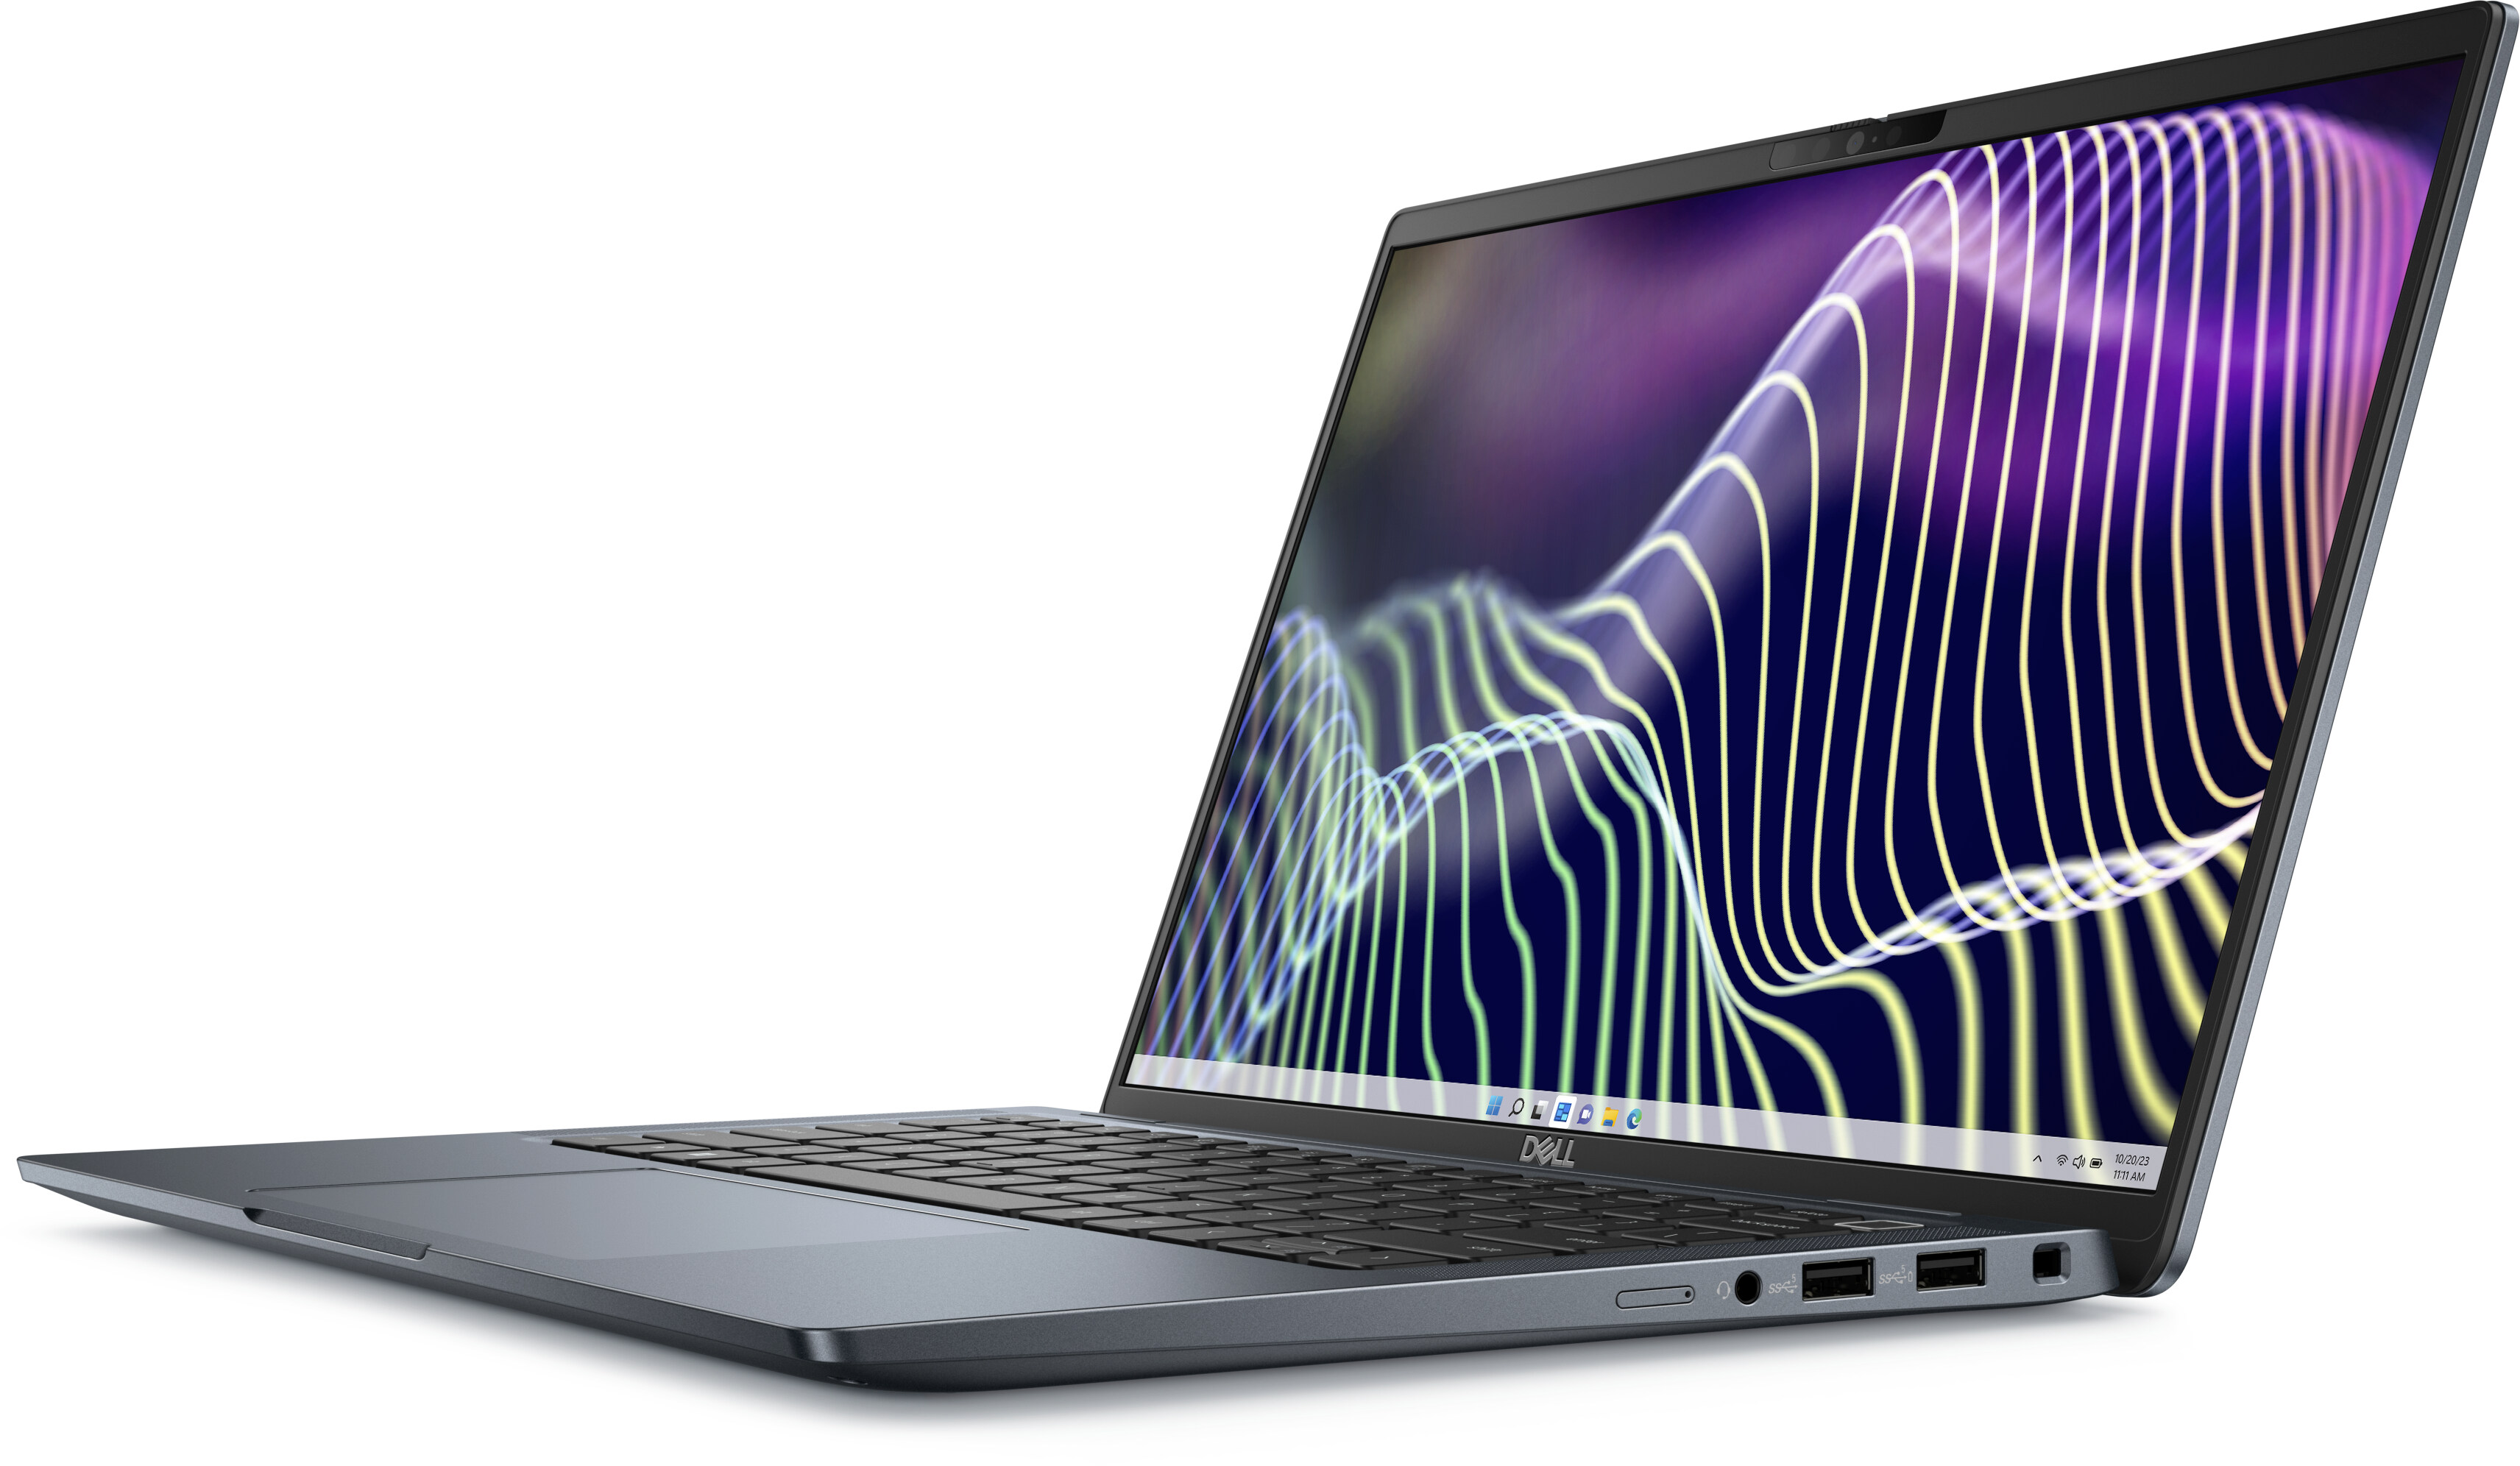 https://i.dell.com/is/image/DellContent/content/dam/ss2/product-images/dell-client-products/notebooks/latitude-notebooks/latitude-14-7440-laptop-2-in-1/media-gallery/blue/notebook-latitude-14-7440-t-fpr-blue-gallery-12.psd?fmt=pjpg&pscan=auto&scl=1&wid=3424&hei=1992&qlt=100,1&resMode=sharp2&size=3424,1992&chrss=full&imwidth=5000